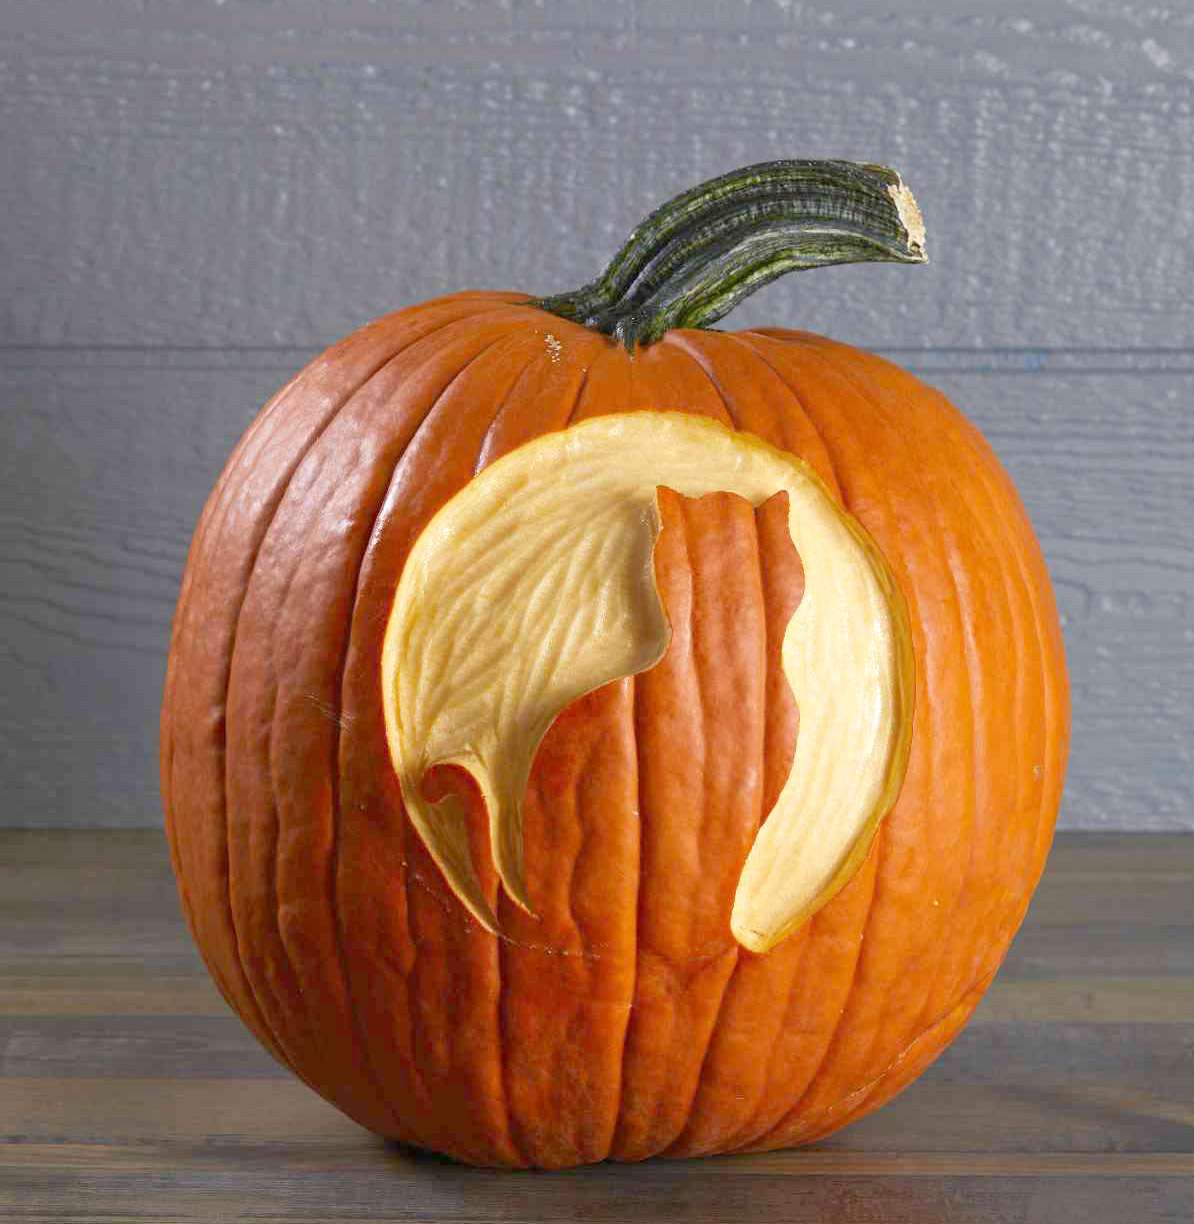 Simple Carving Cool Designs For Pumpkins - mydreamsidream